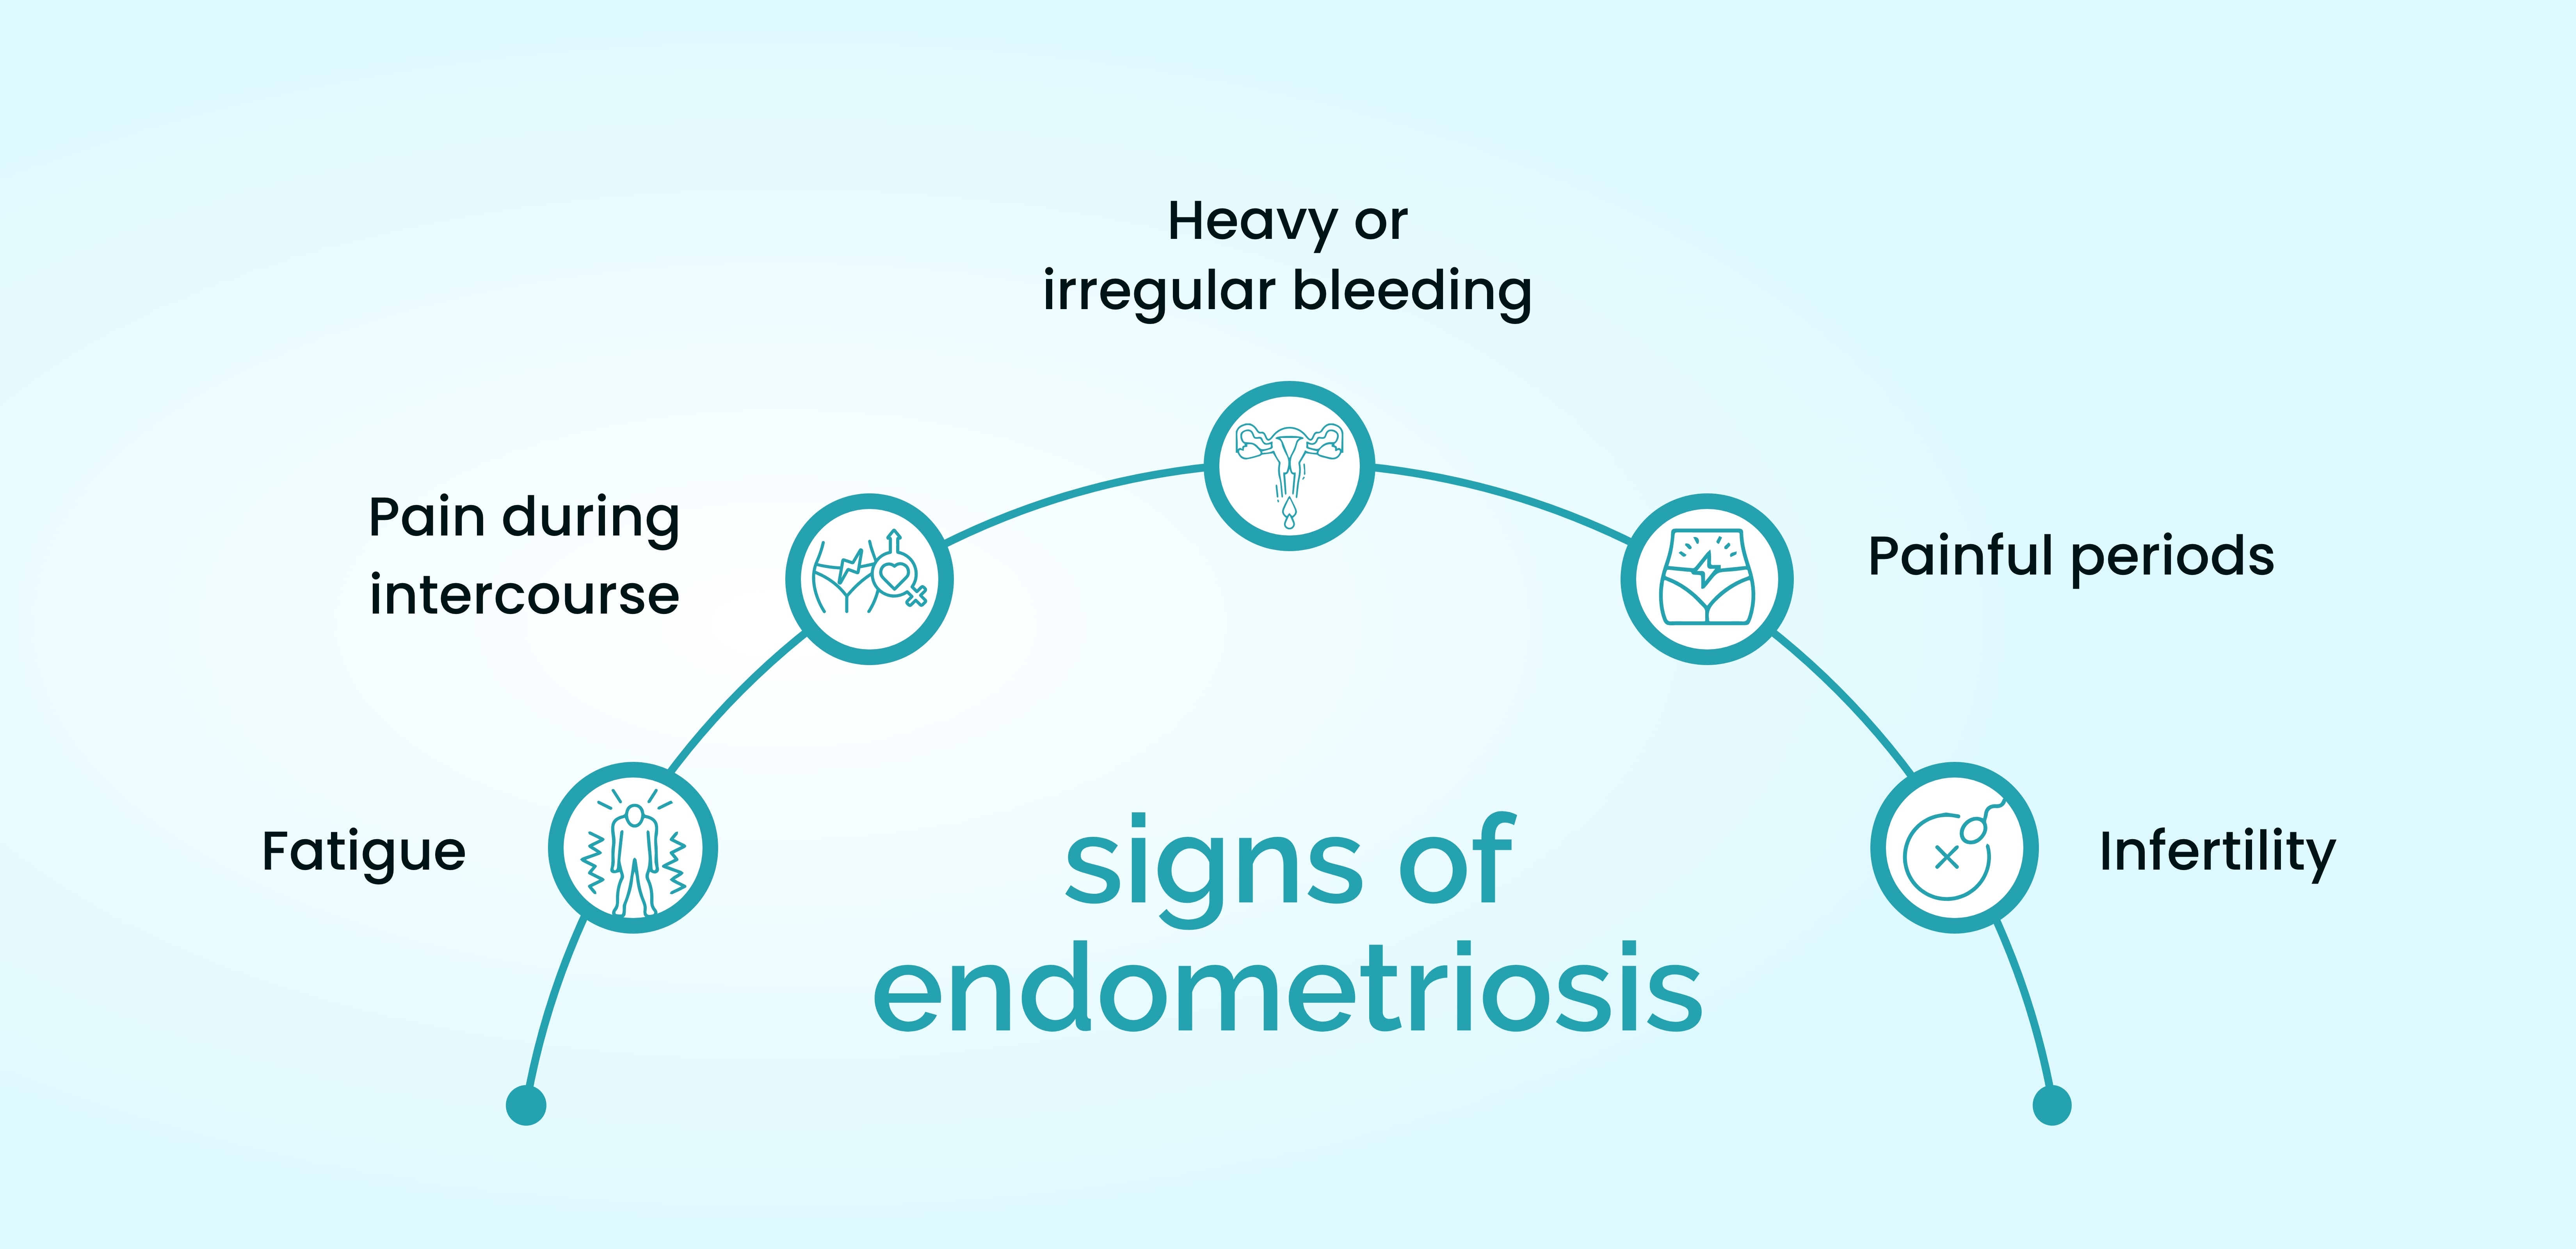 Are there any early signs of endometriosis?